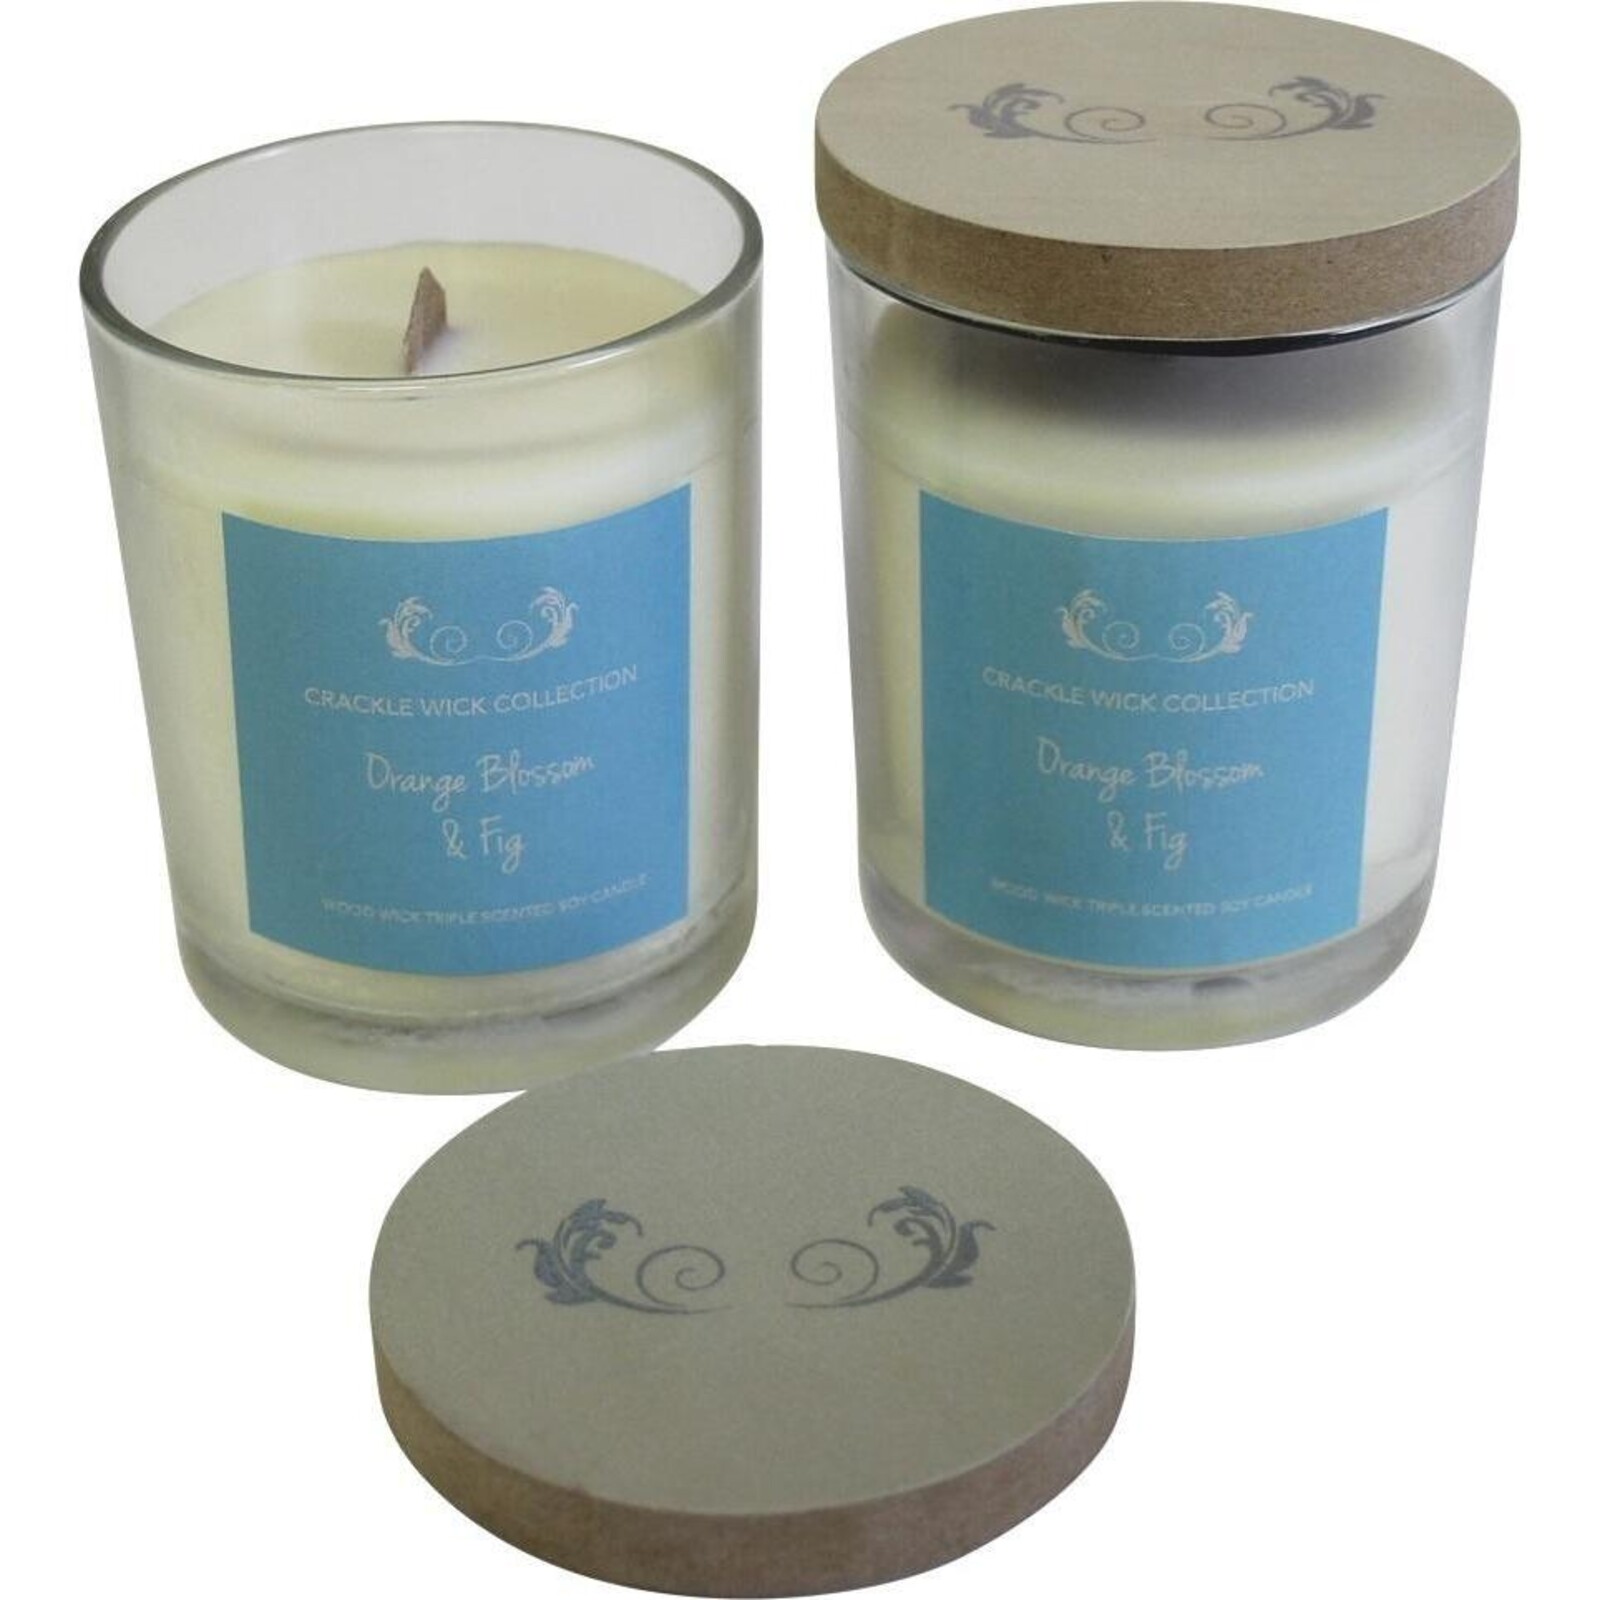 Candle Soy Crackle Wick Orange Blossom & Fig Sml